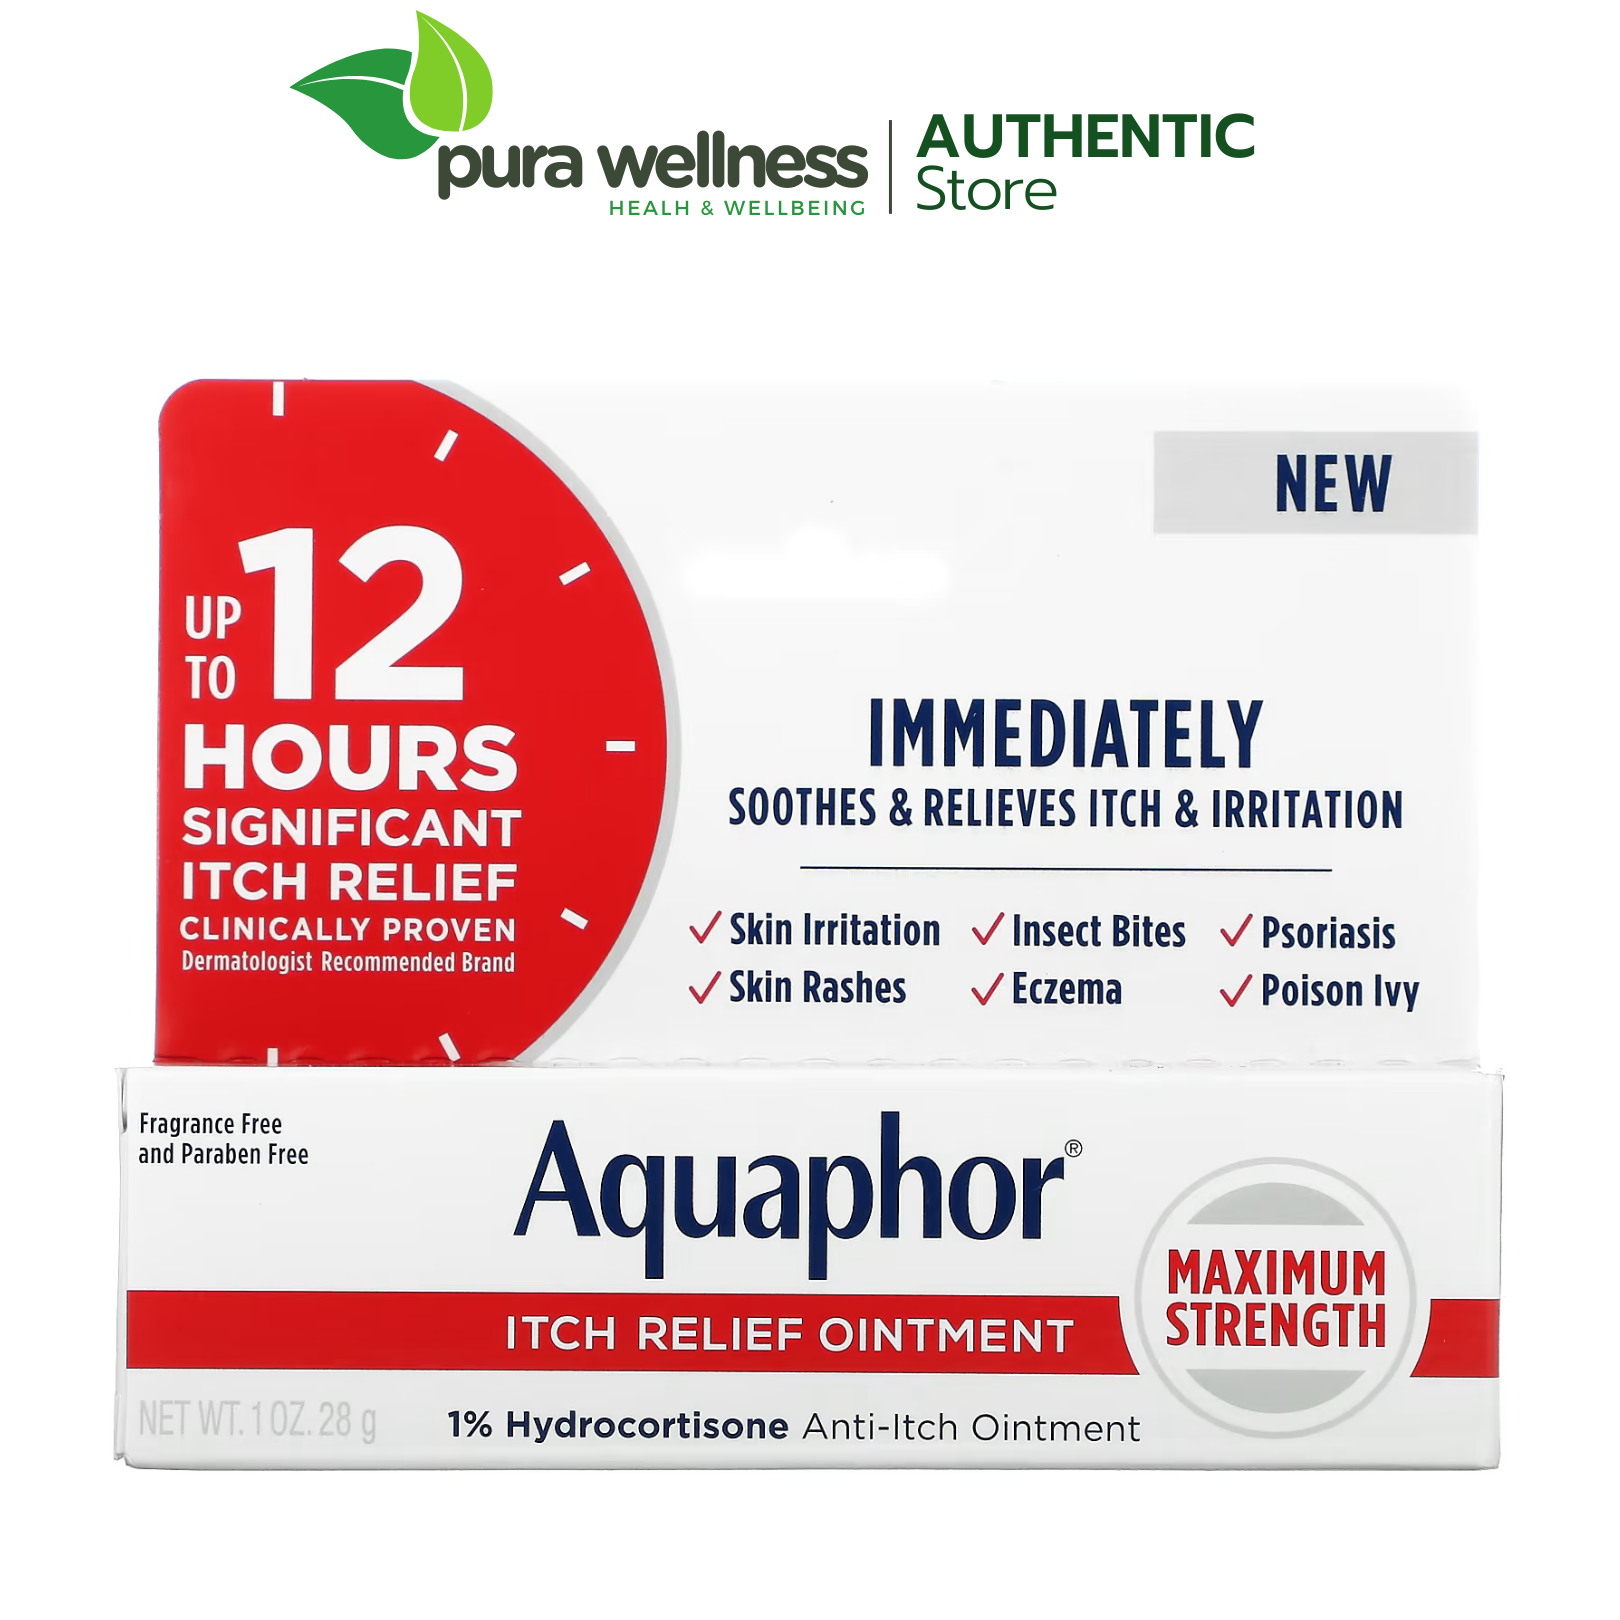 Aquaphor Itch Relief Ointment 1% Hydr0c0rtis0ne